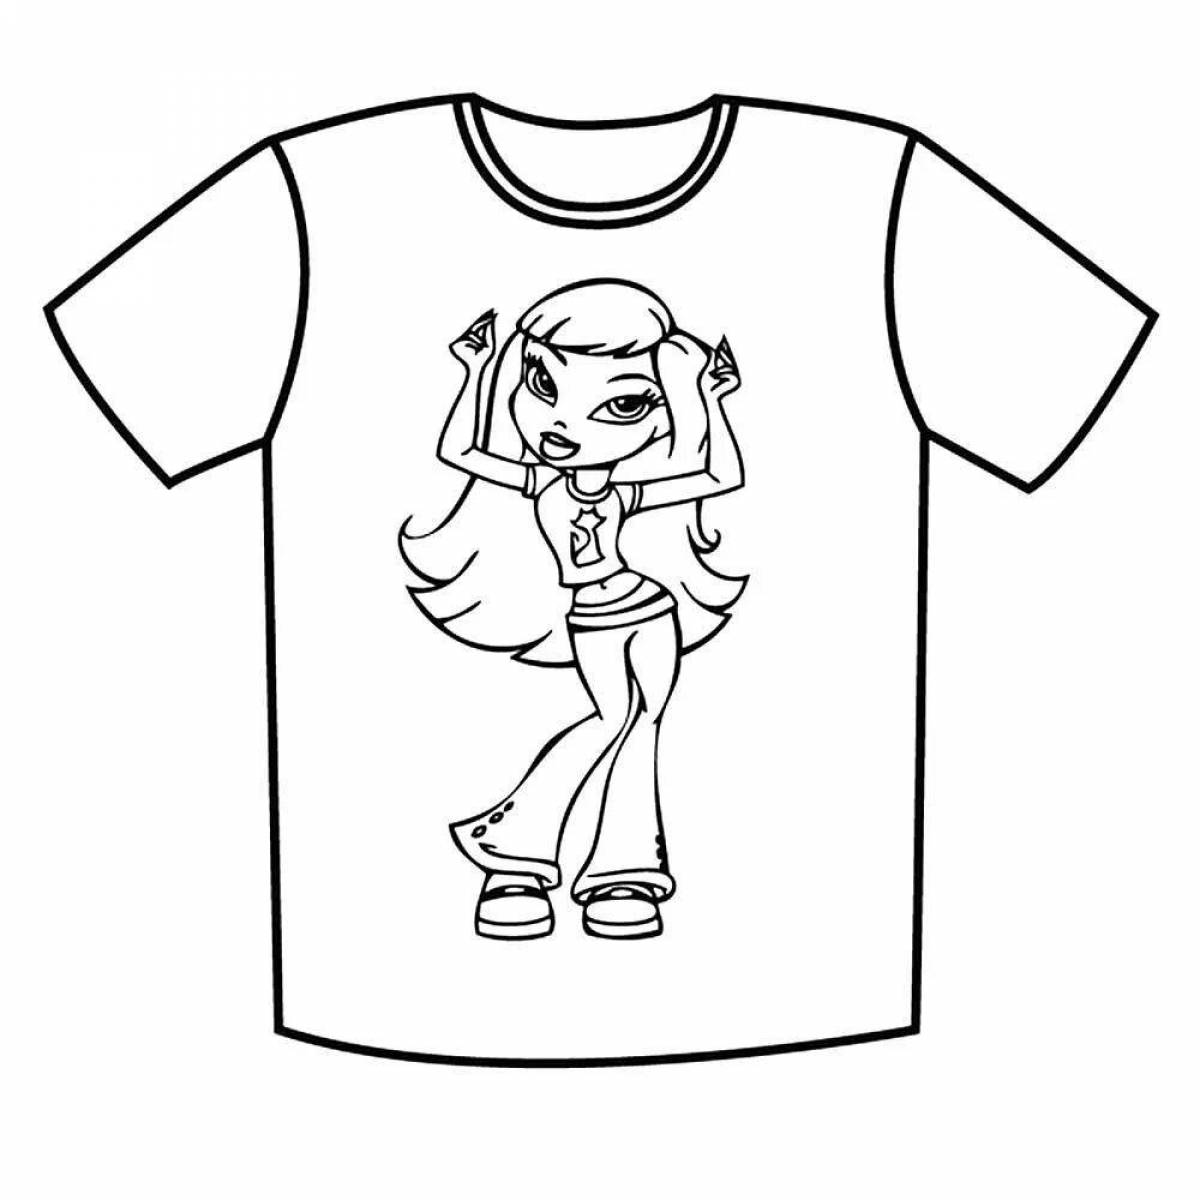 Fancy T-shirt coloring page